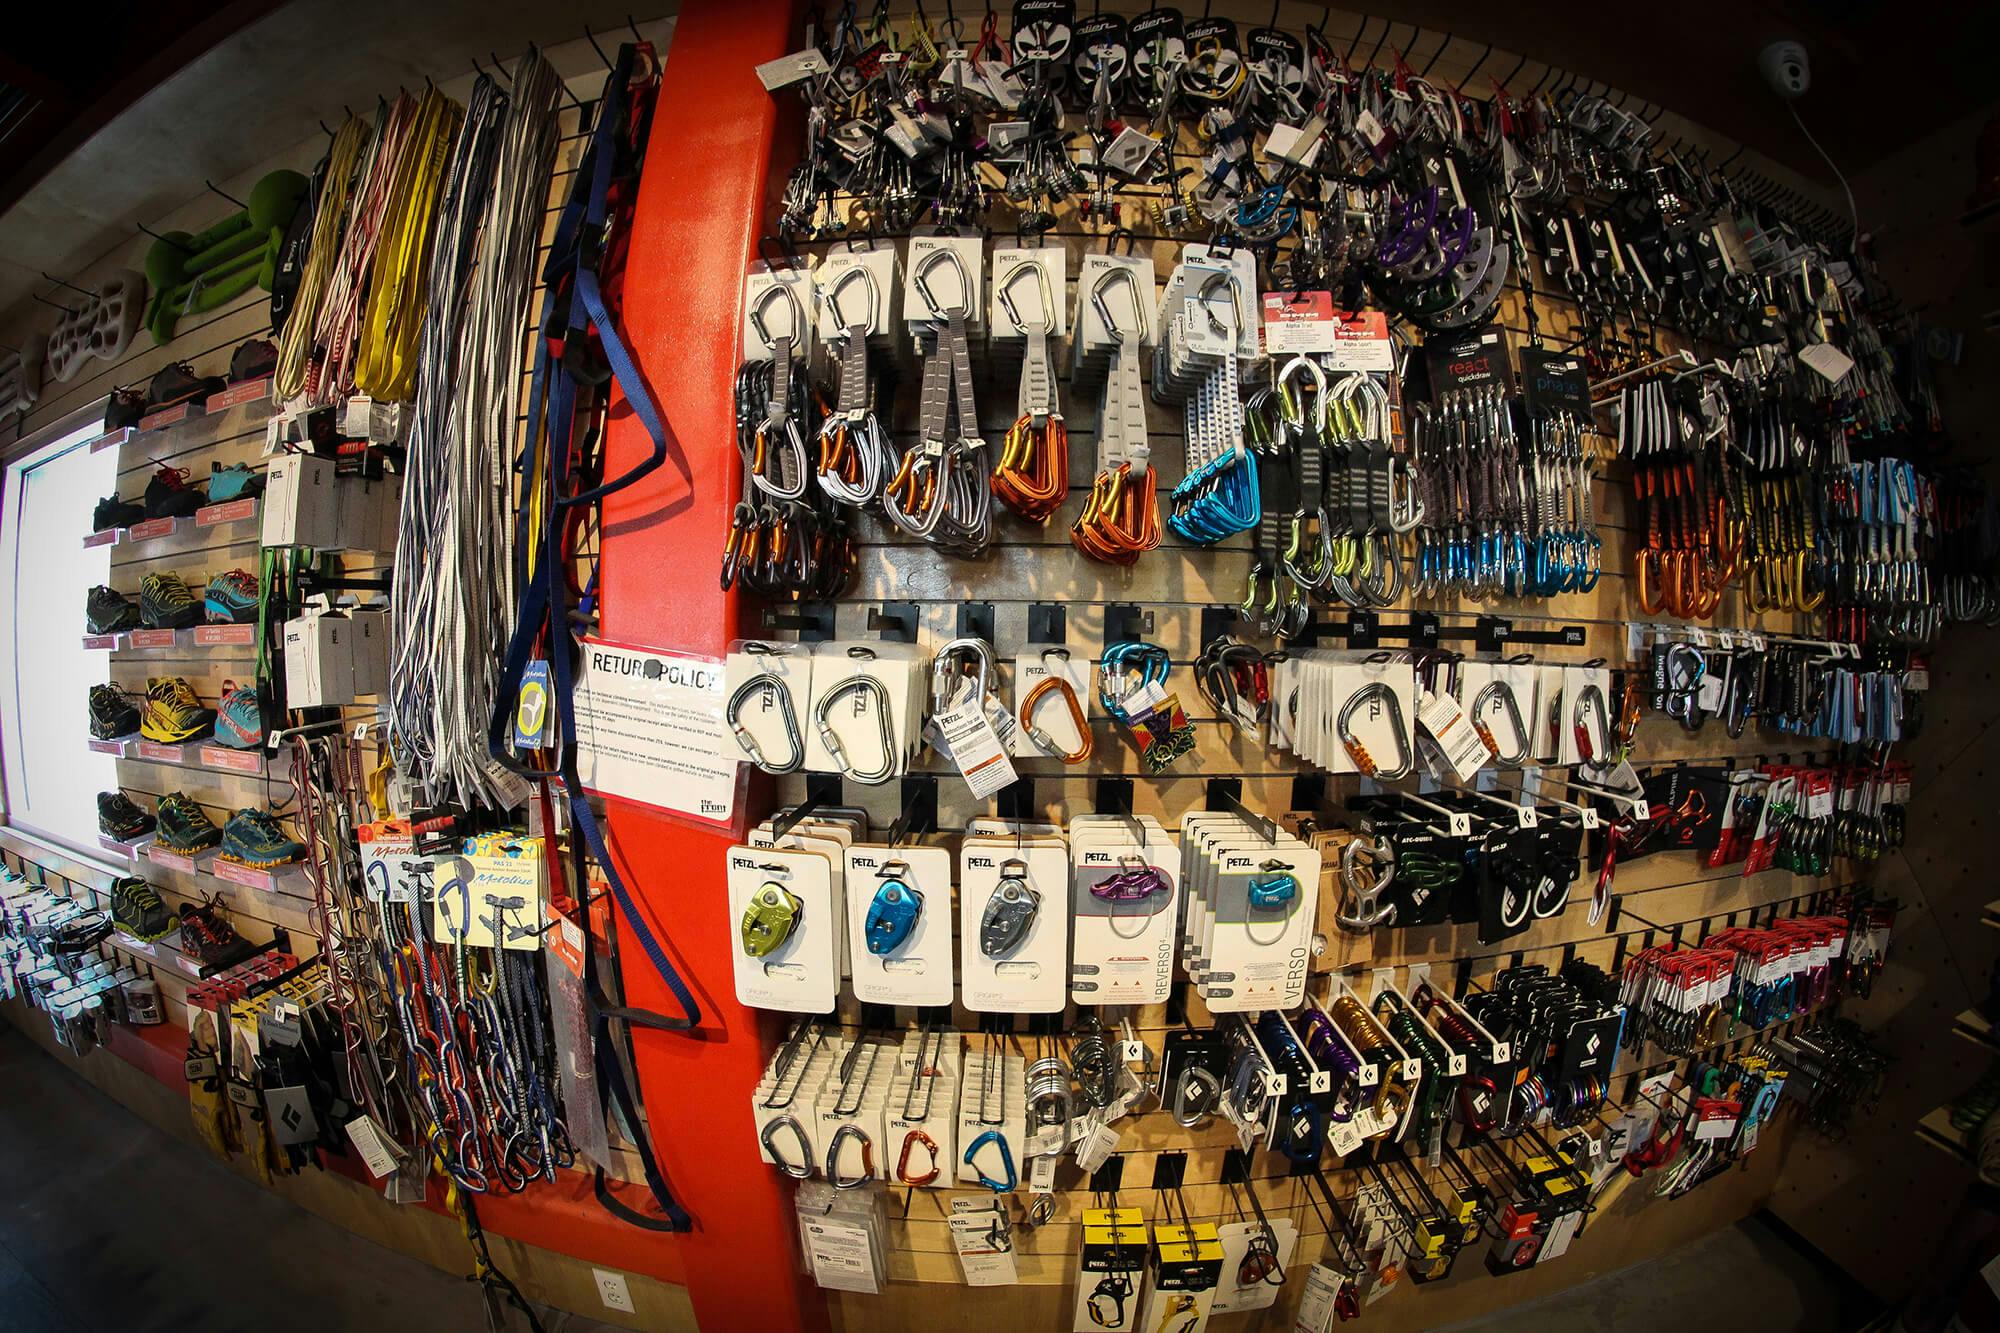 Climbing hardware and other climbing supplies available at Habit Climbing